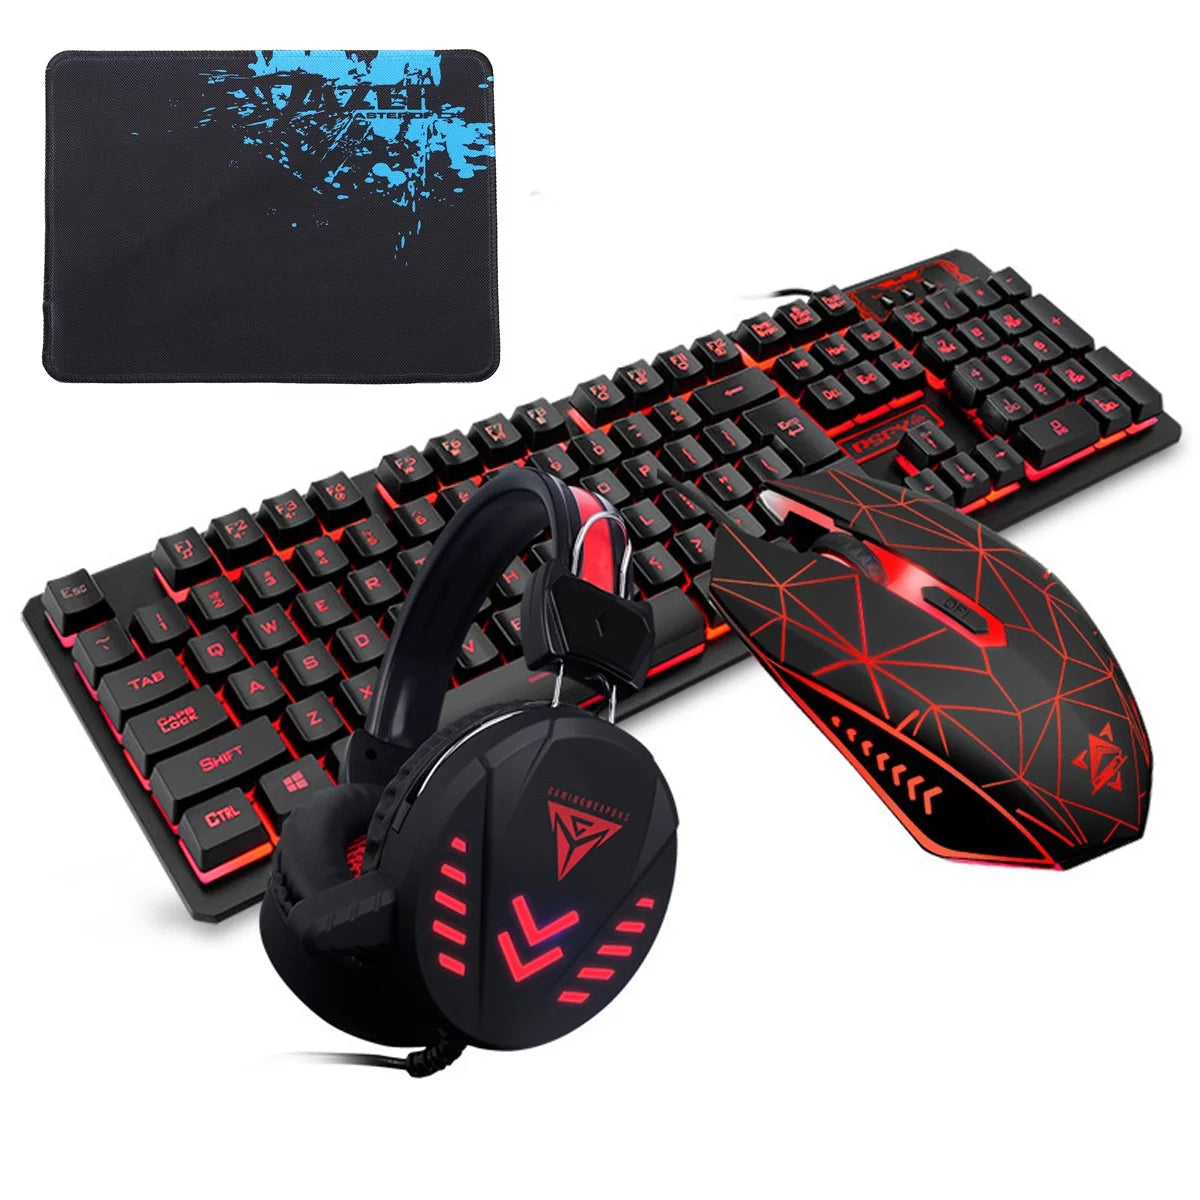 Gaming Keyboard and Mouse Combo with Headset, K59 RGB Backlit 3 Colors Keyboard, 6 Button 4DPI USB Wired Gaming Mouse, Lighted Gaming Headset with Microphone Set for Gamer